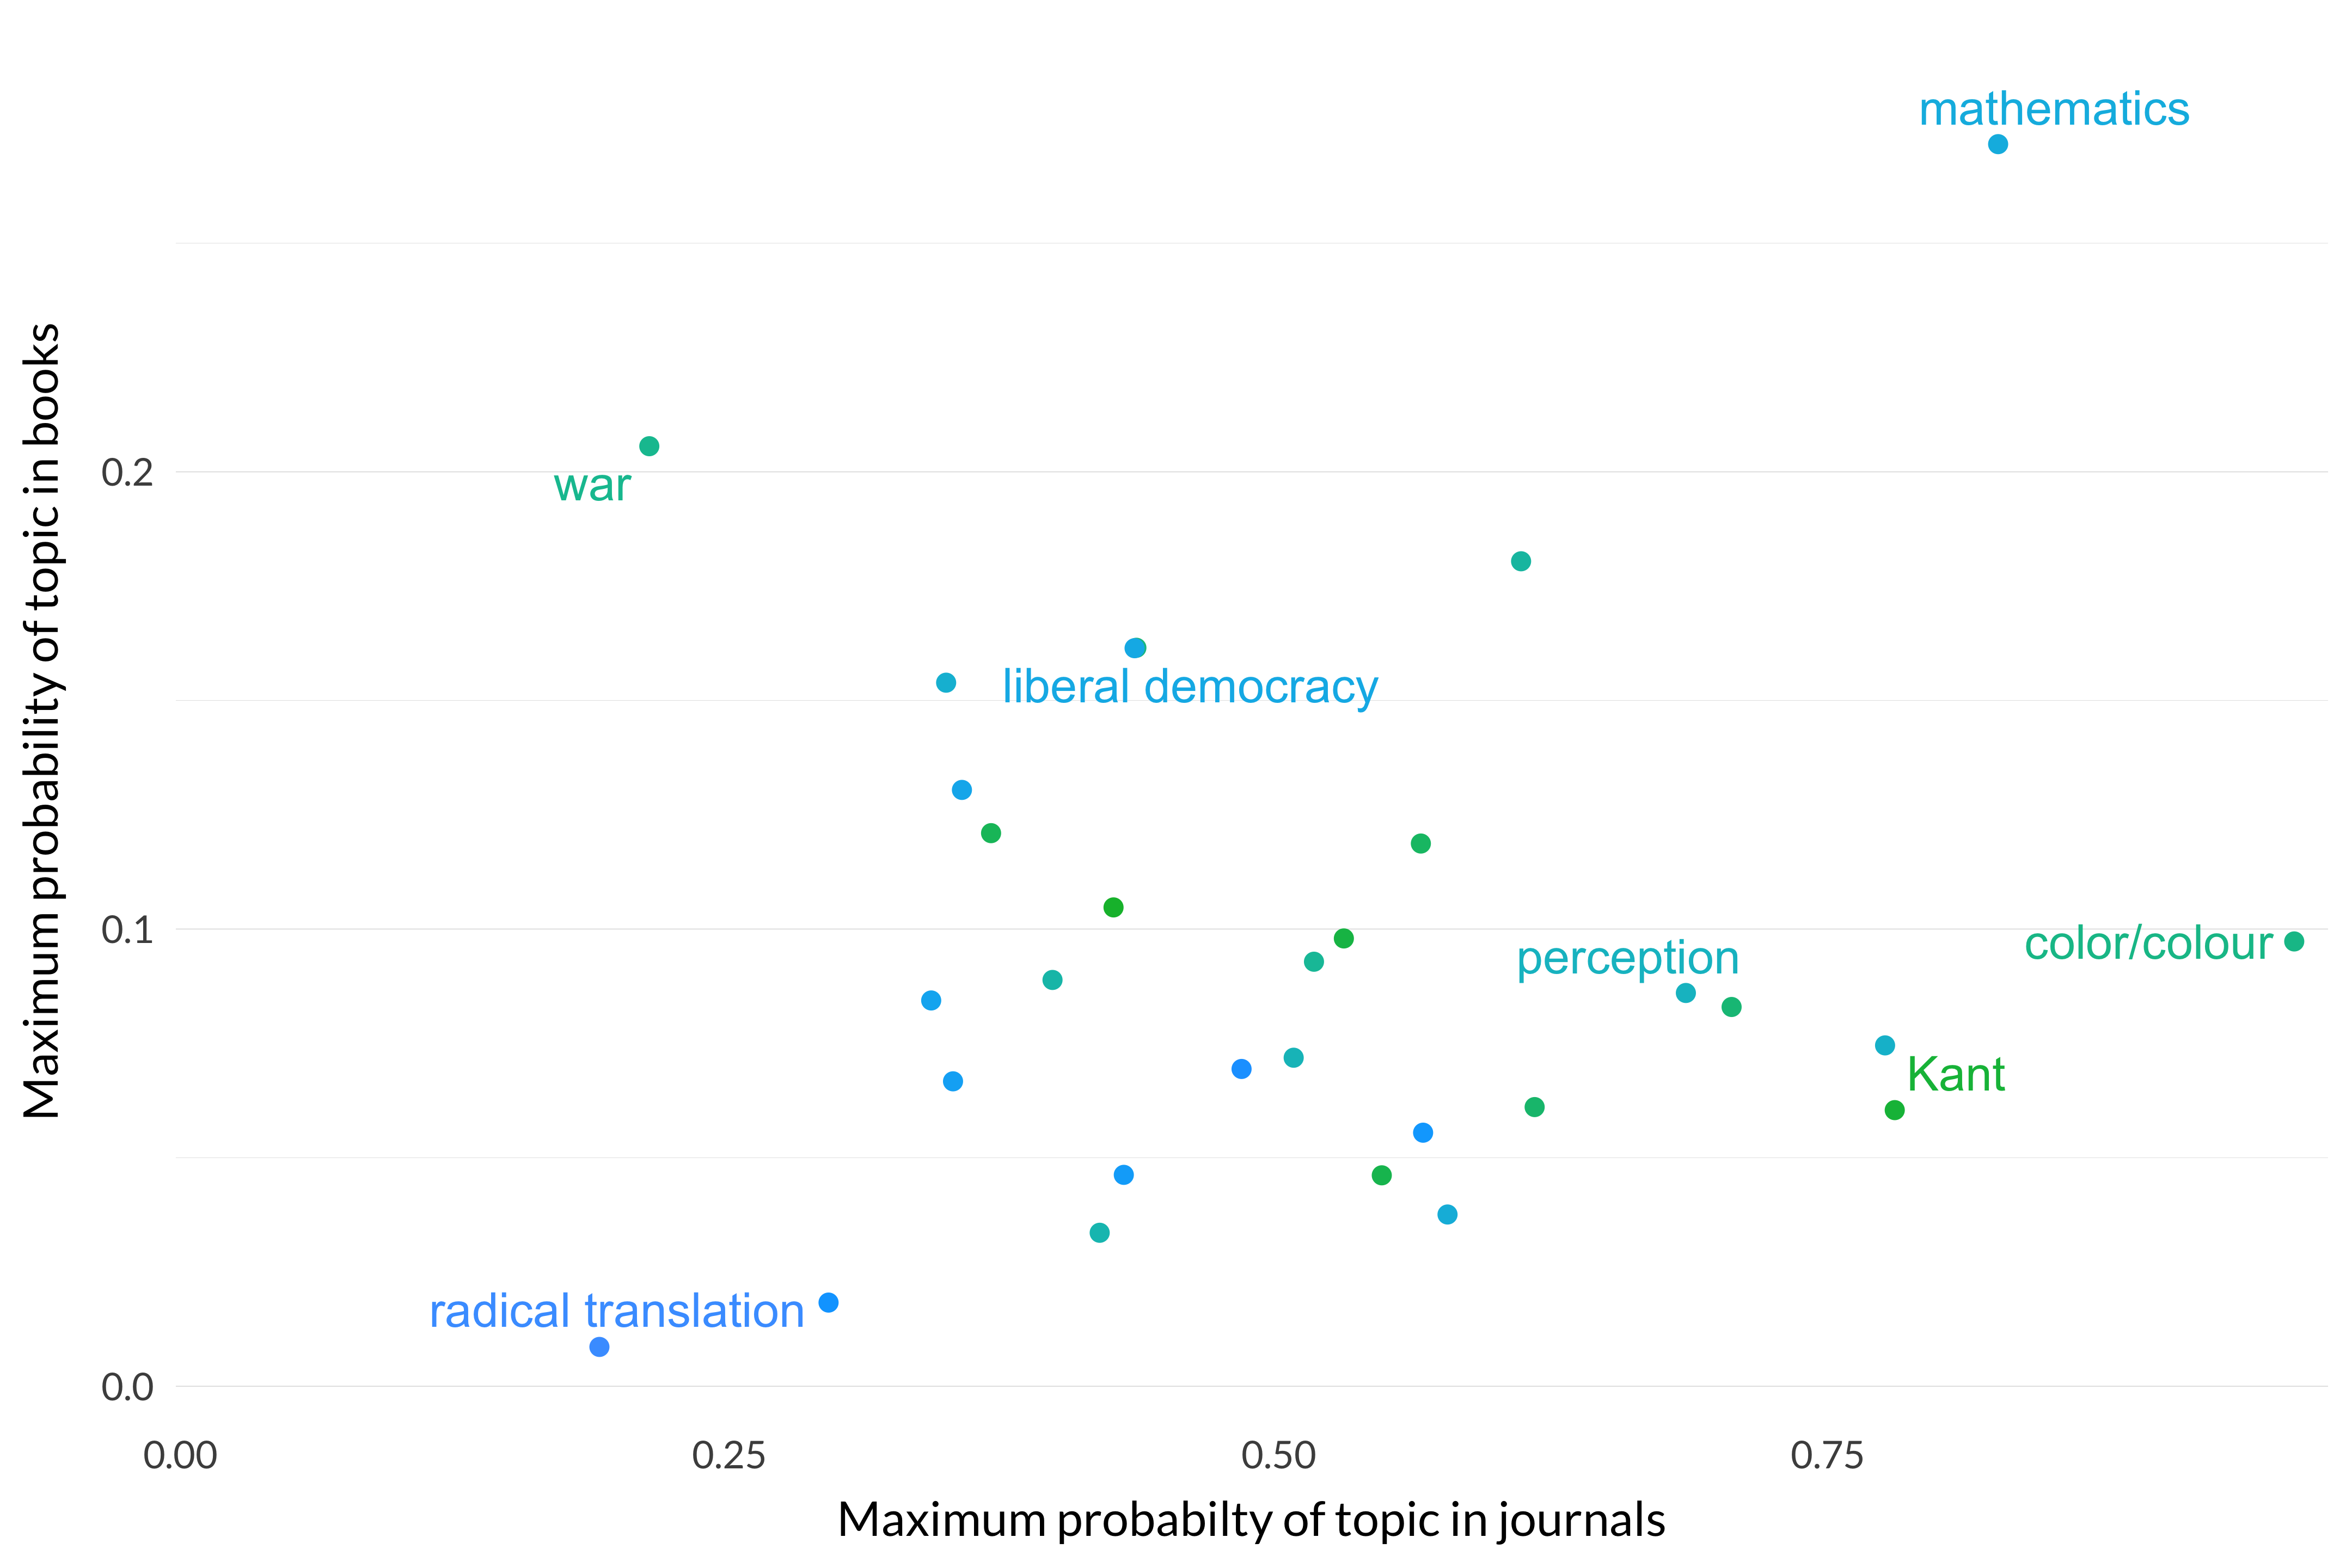 A scatterplot comparing the maximum probability distribution of topics 31-60 in journal articles up to 1925 and in the books being discussed. Maximum probabilities are generally higher for journals than books. War is much more prevalent in books.